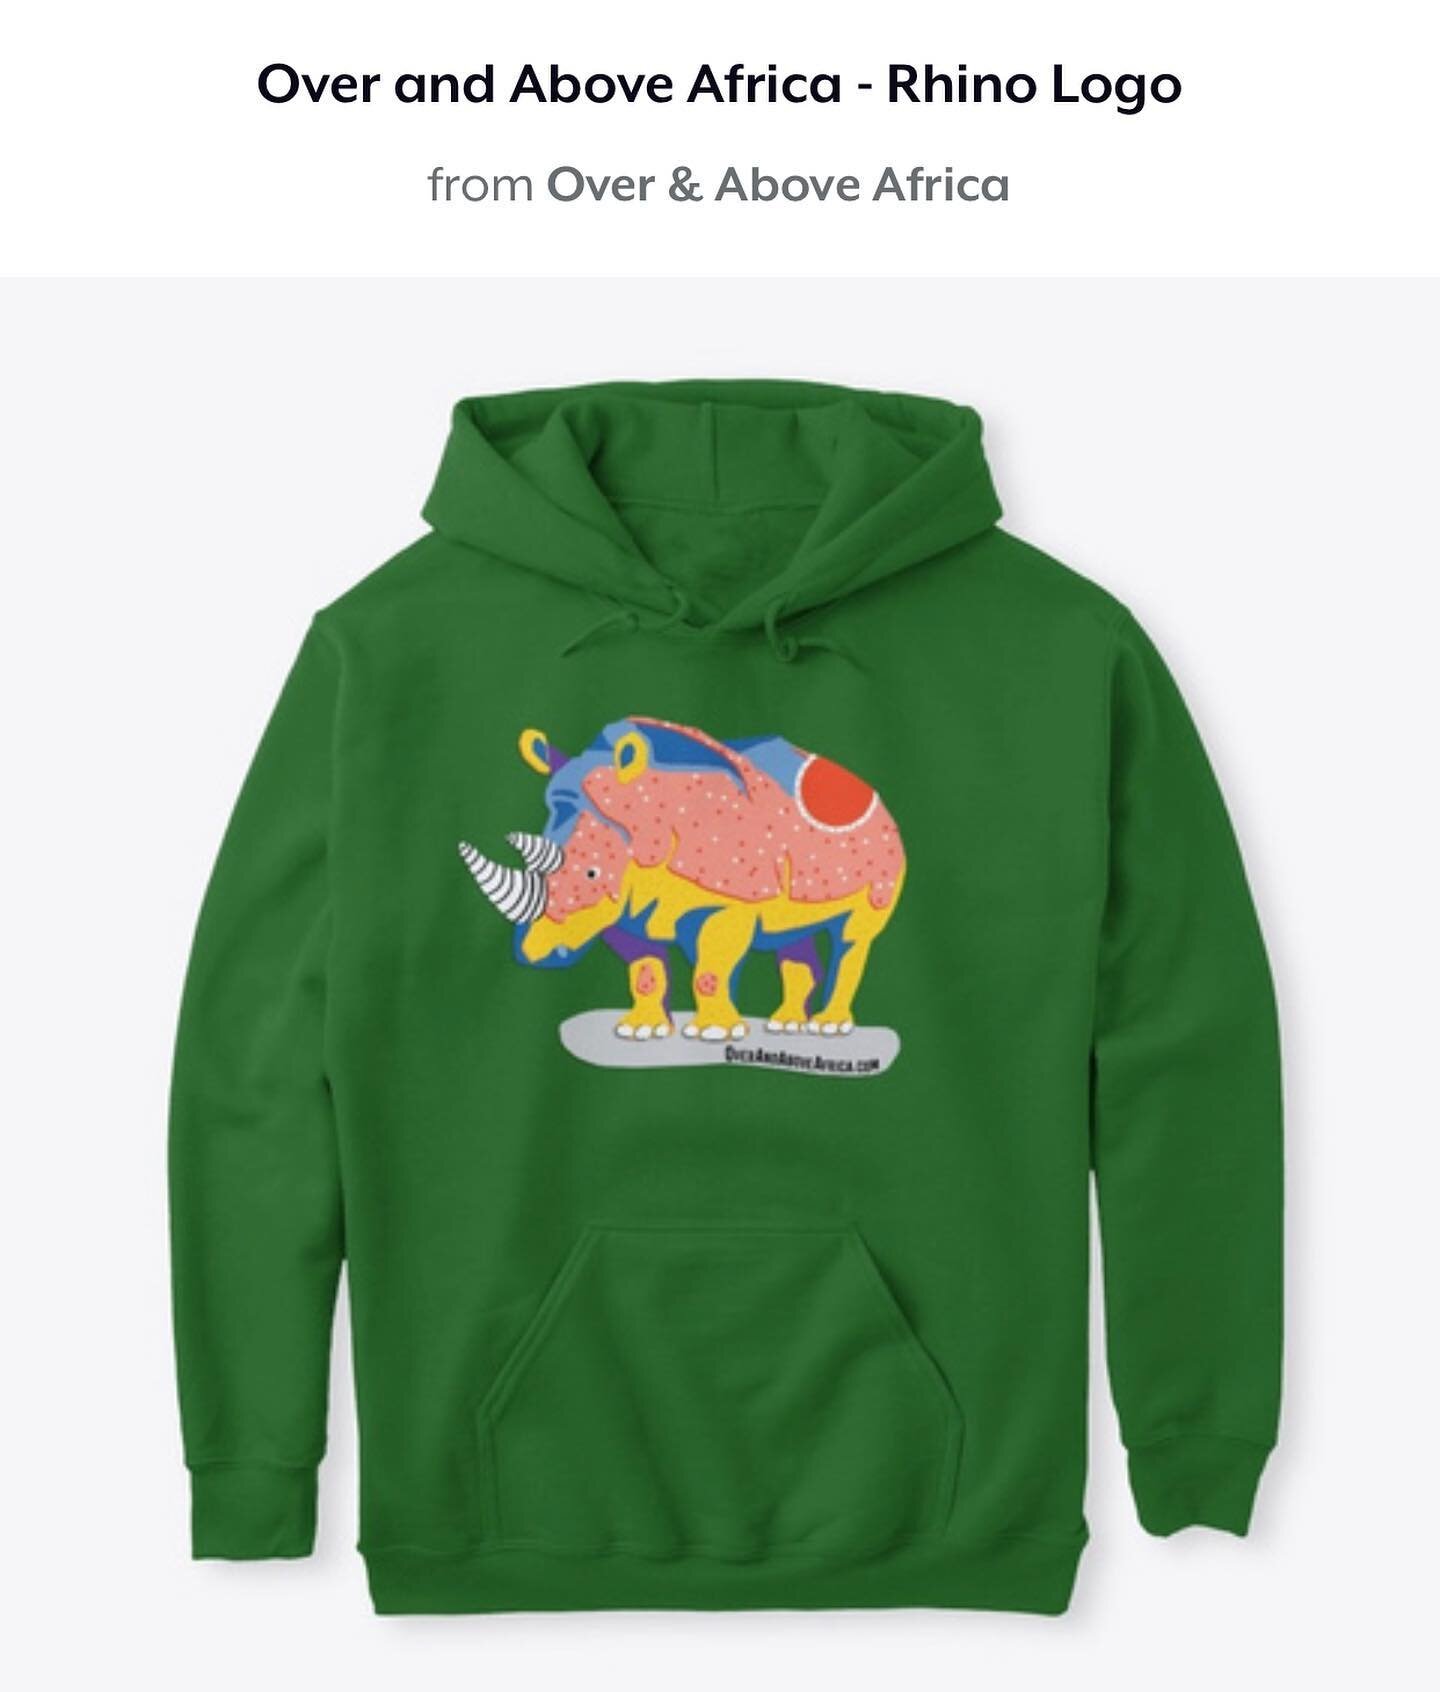 We have a whole new range of merchandise in multiple colours! Now you, your pets and your children can look good - while supporting endangered wildlife! 
Link in bio or OverAndAboveAfrica.com/Shop